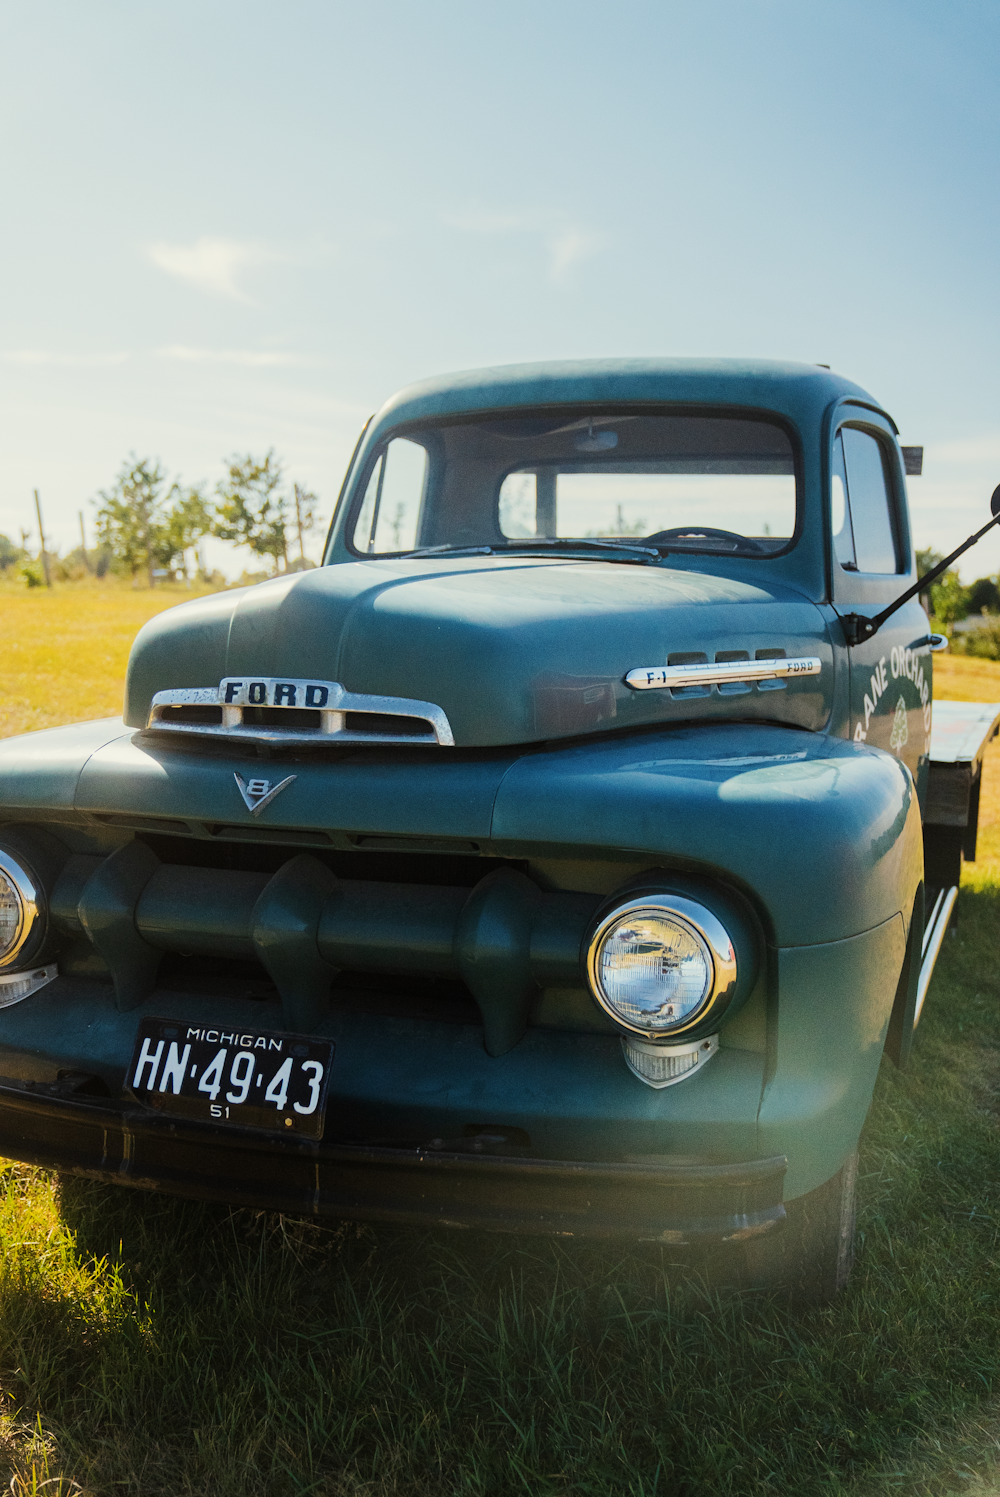 an old green truck parked in a grassy field